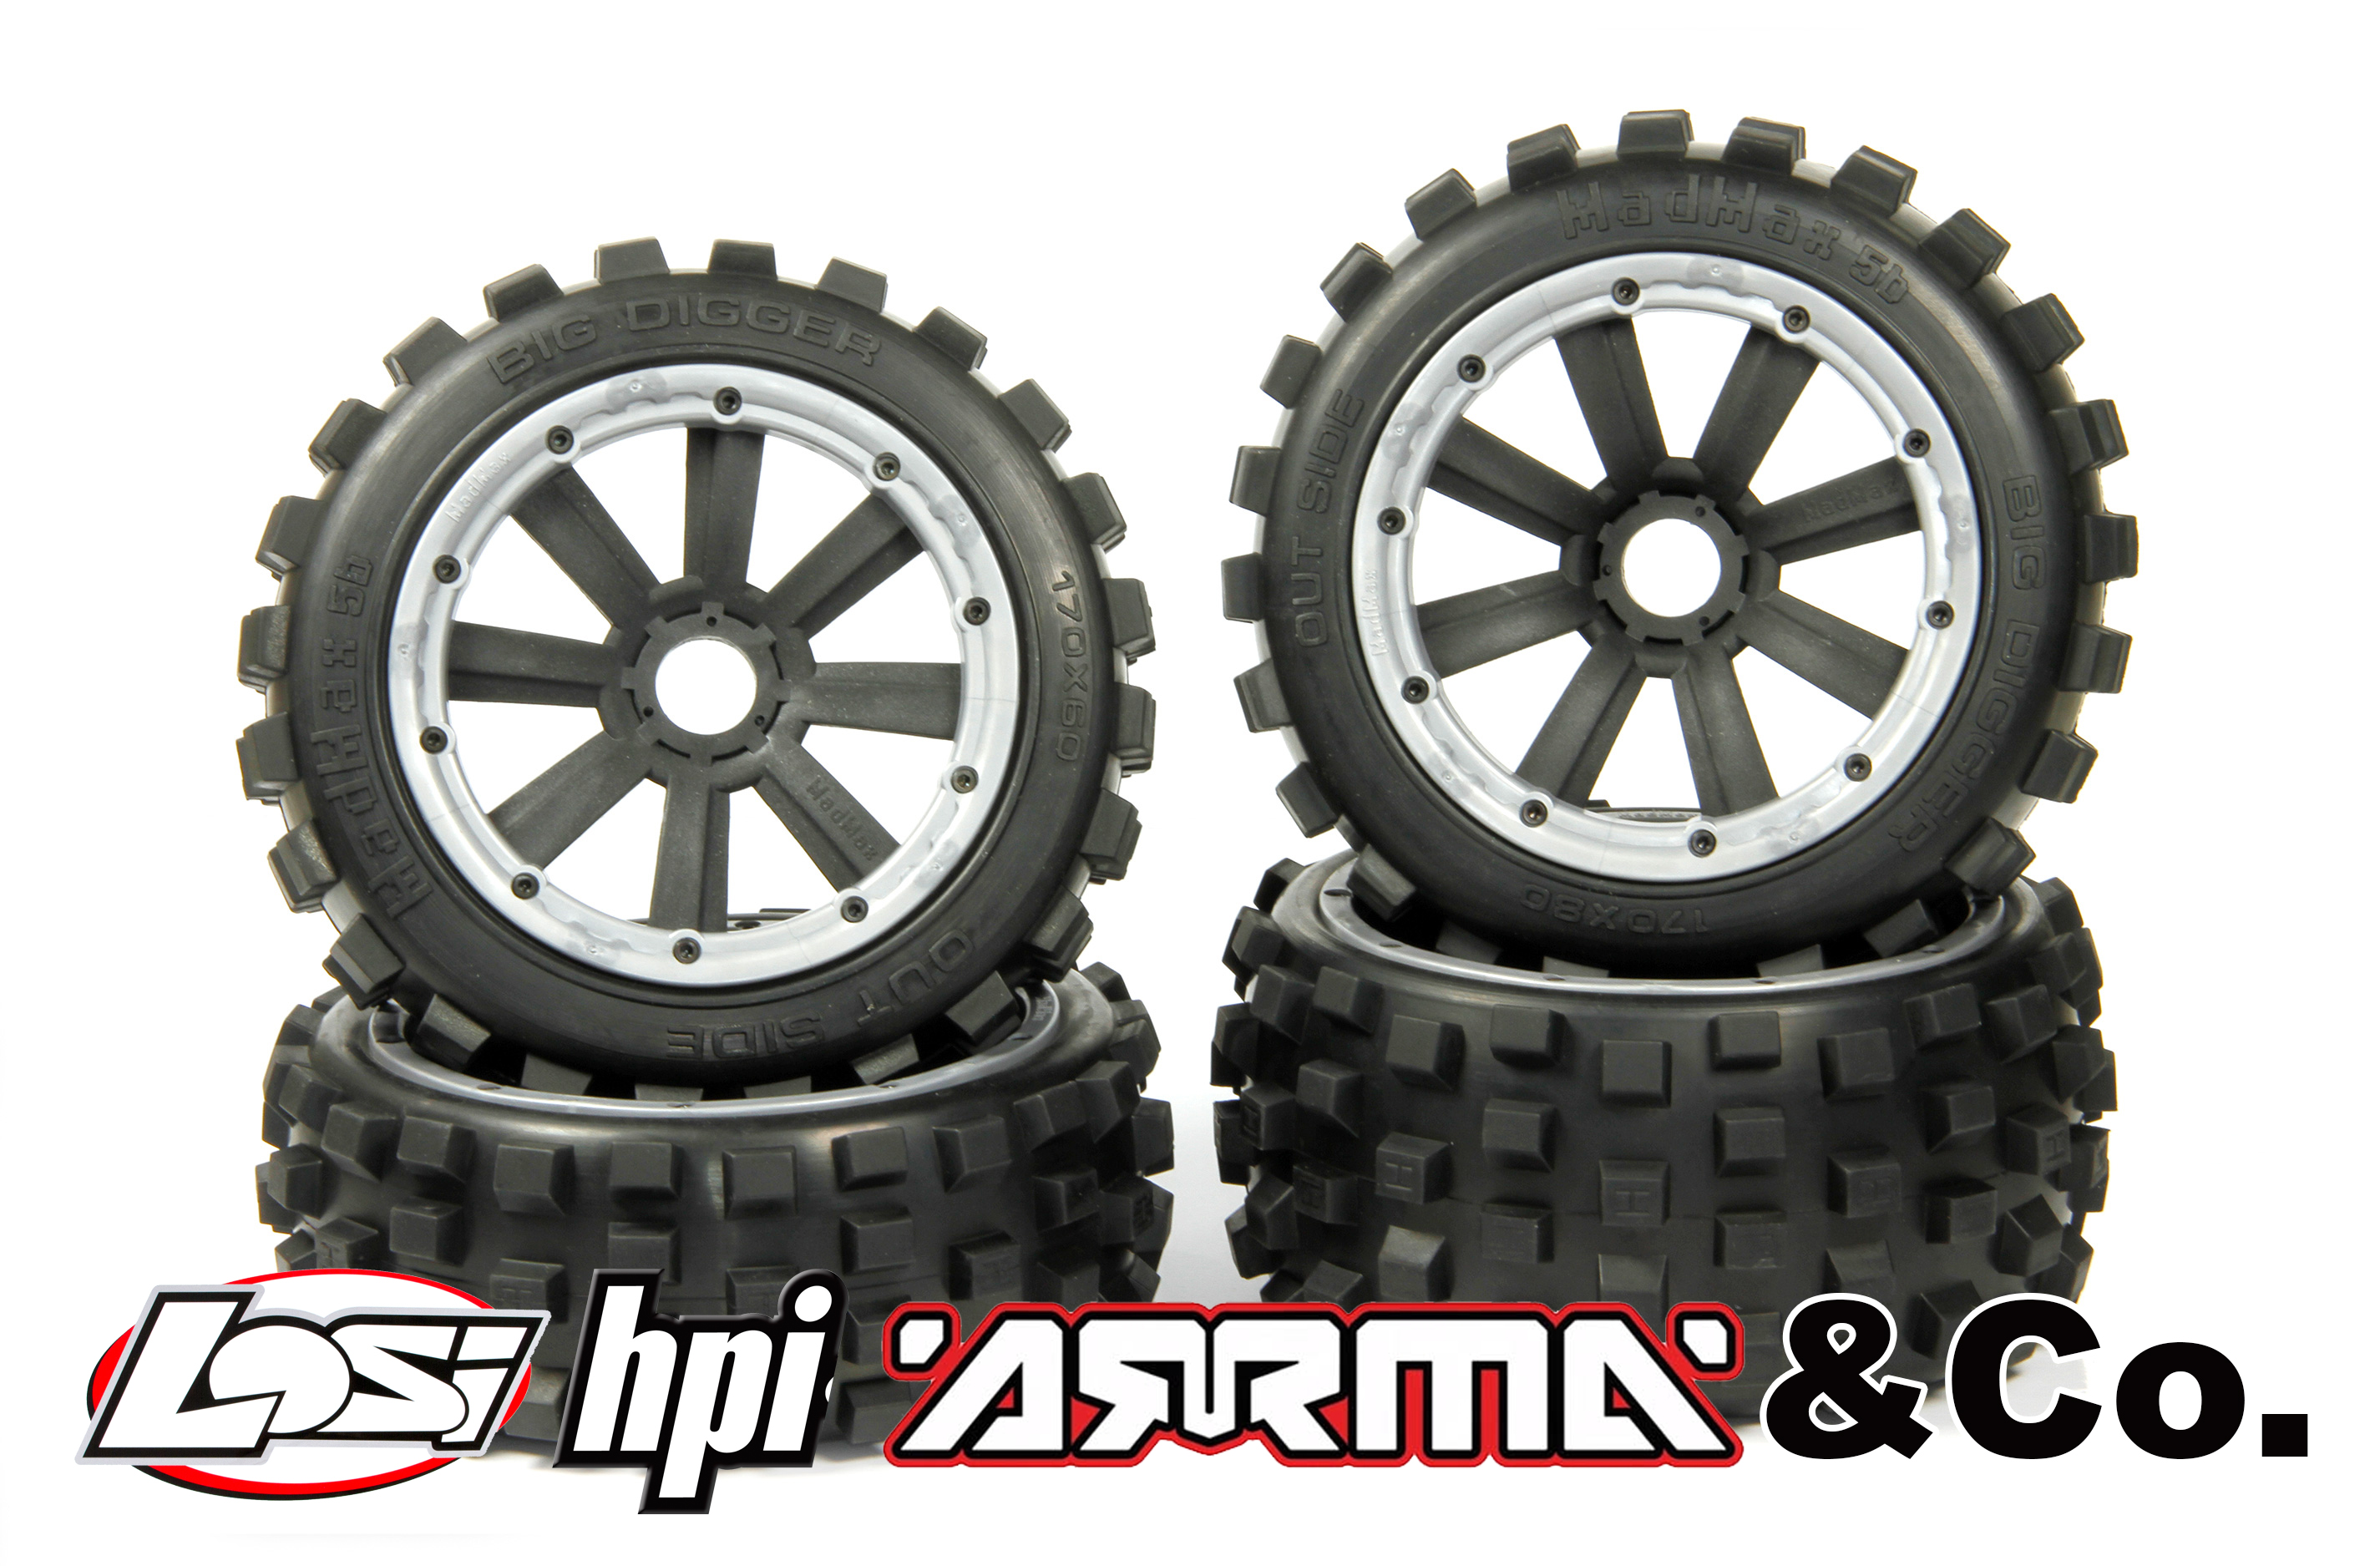 y1406/01 MadMax BIG DIGGER 170x80/x60 for HPI + Losi (24 mm hex drive) Offer